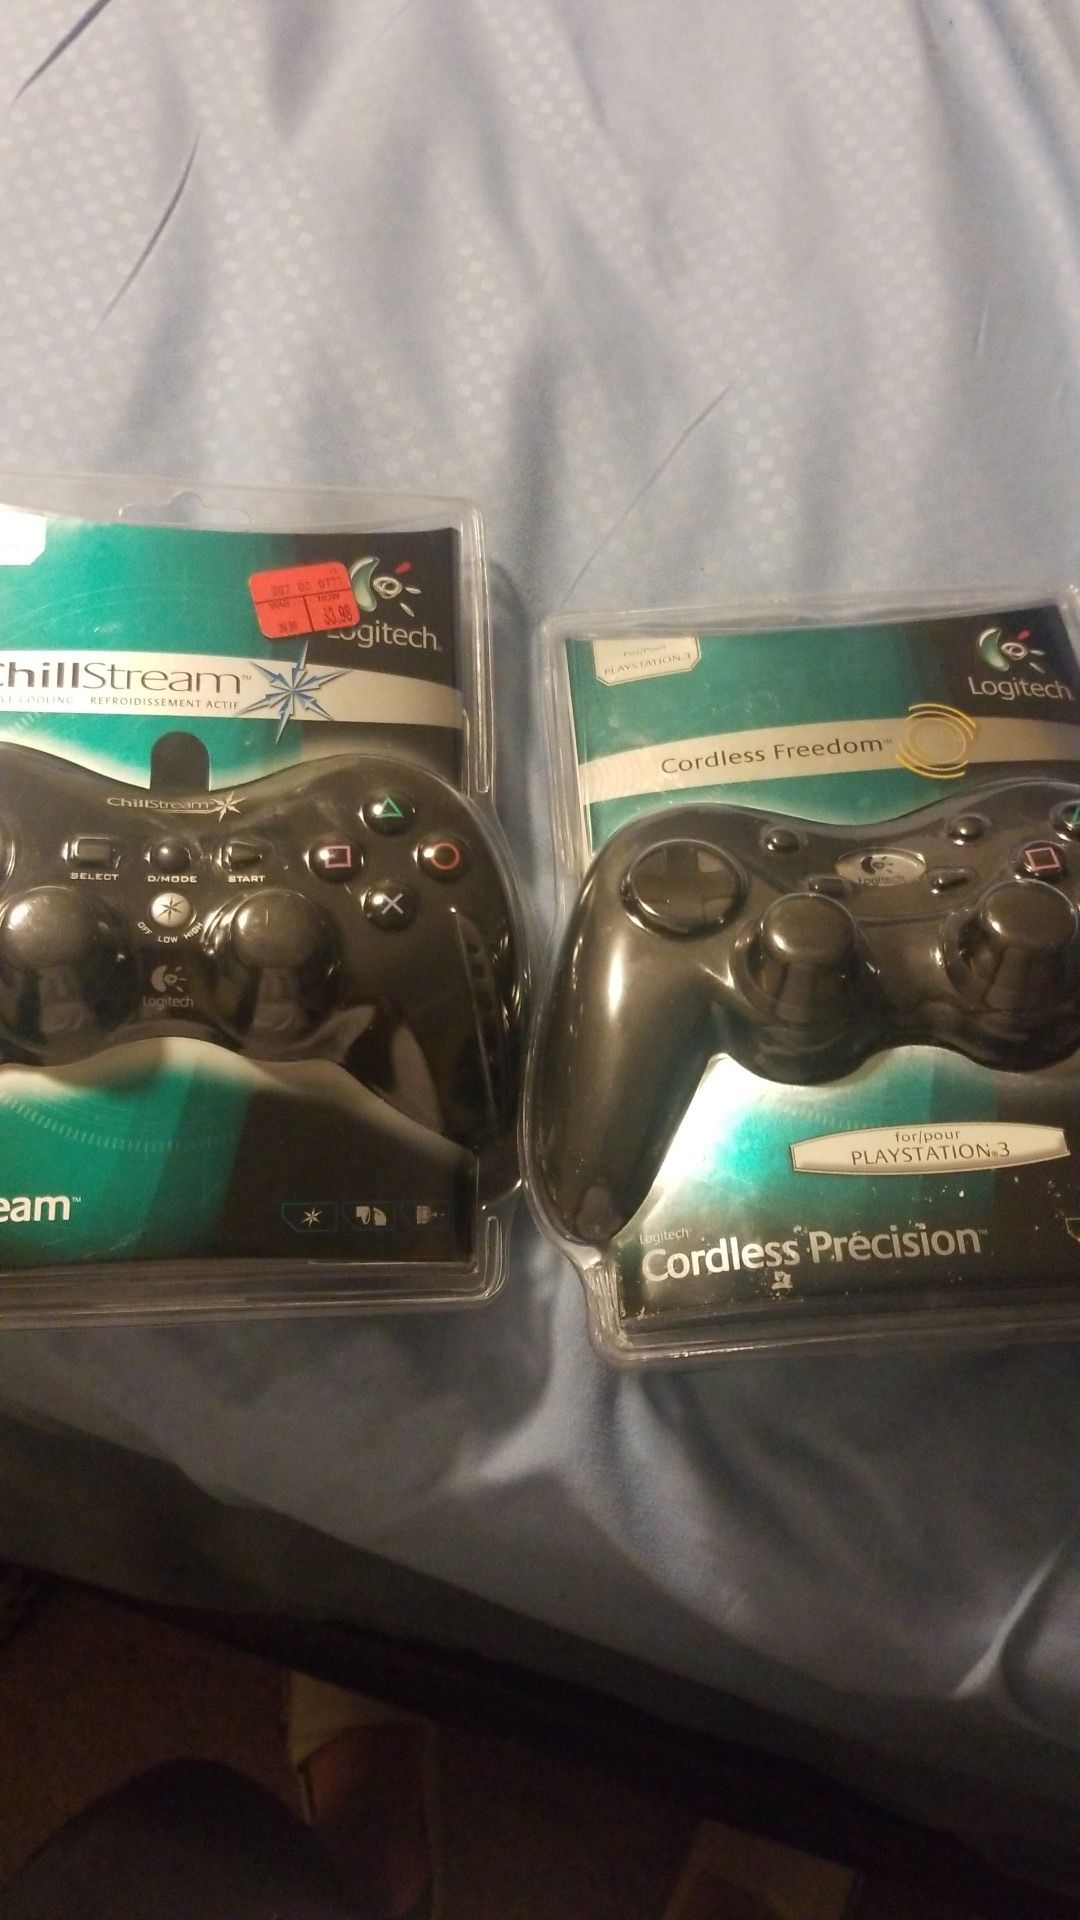 2 ps3... 1 cordless control and the other one is not $ 45